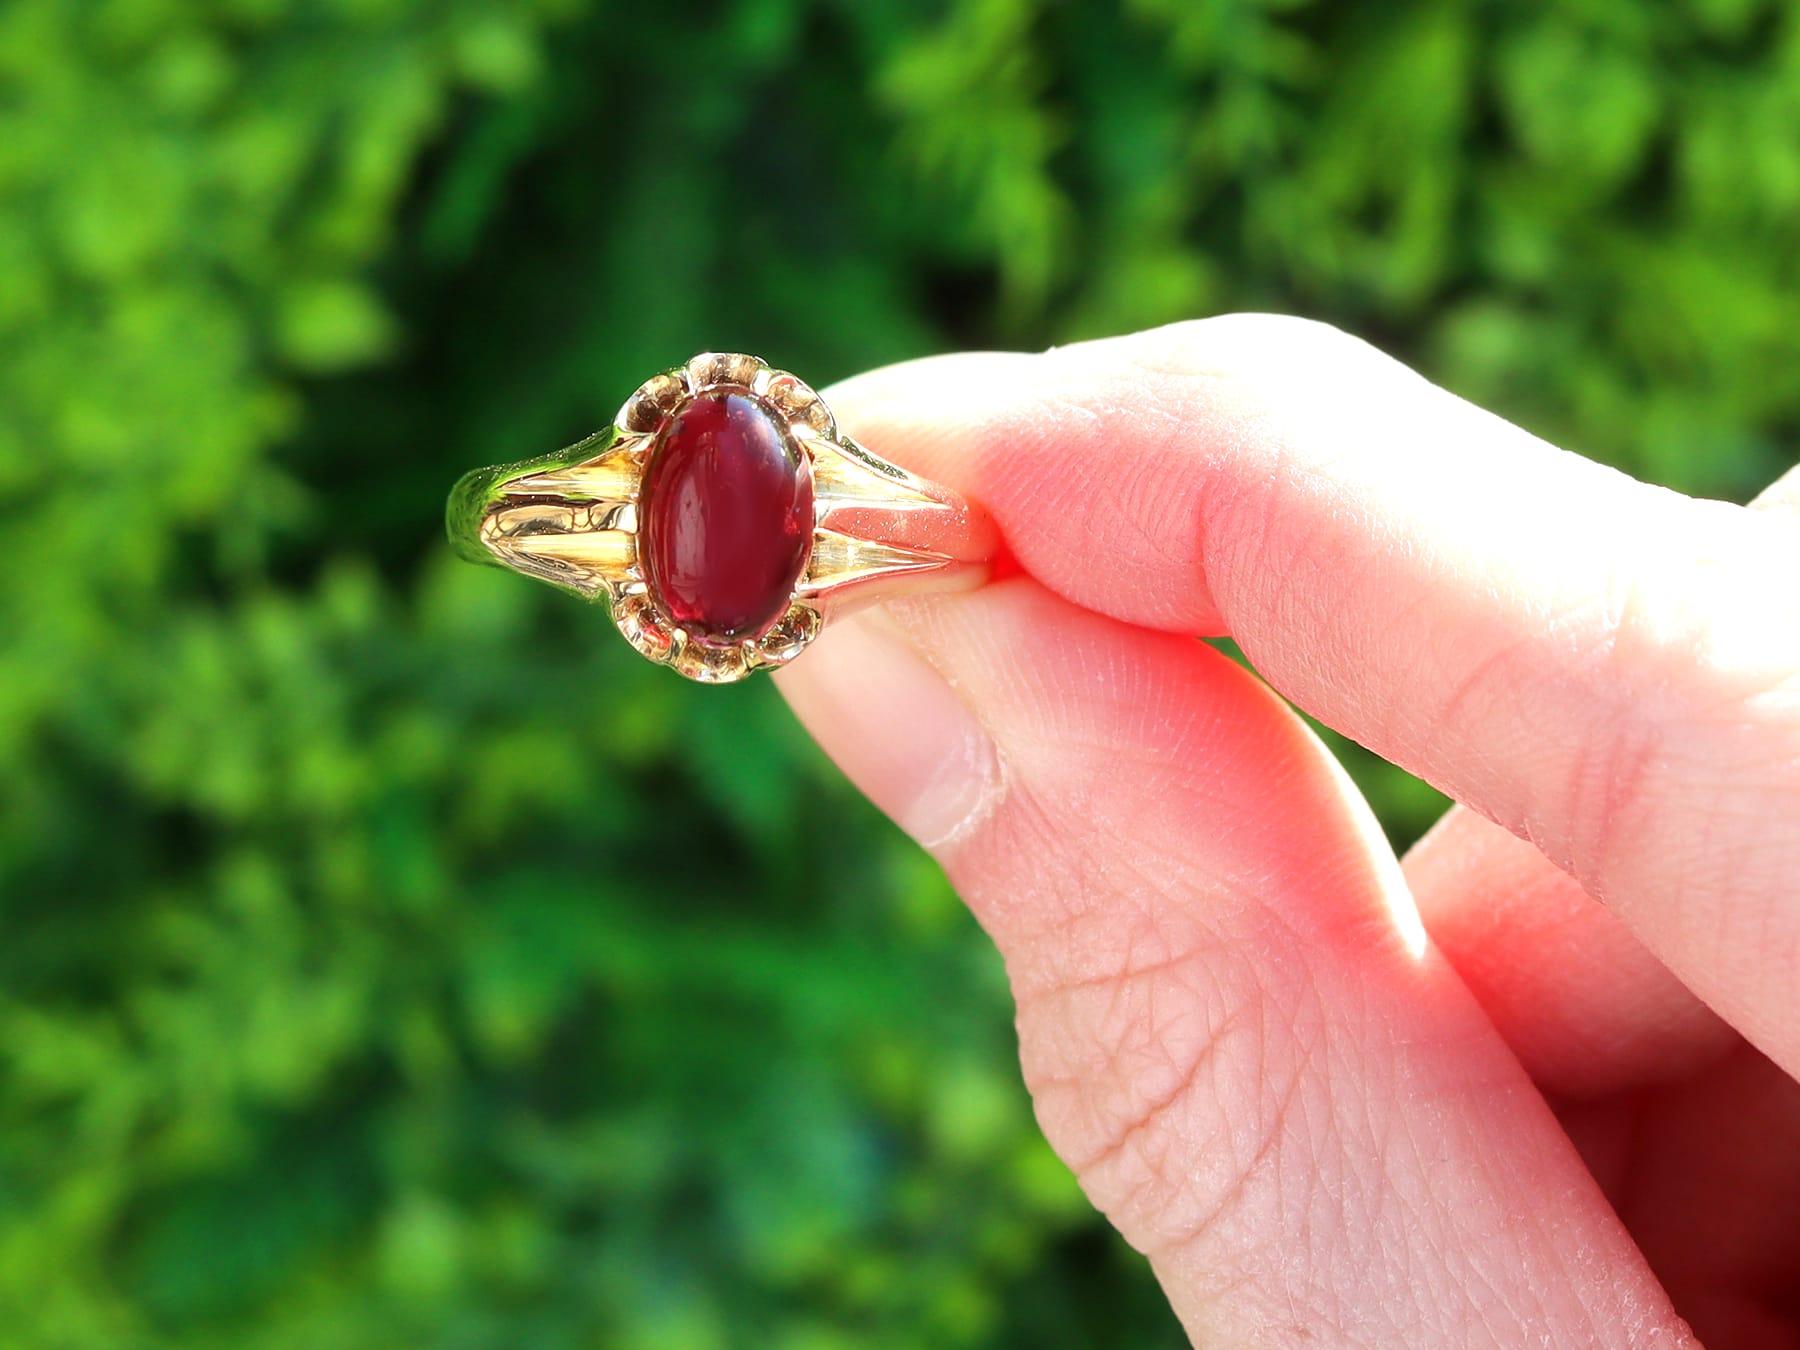 A stunning, fine and impressive antique 3.05 carat garnet and 18 karat yellow gold dress ring; part of our diverse range of gemstone jewellery

This stunning, fine and impressive antique garnet ring has been crafted in 18k yellow gold.

The gold